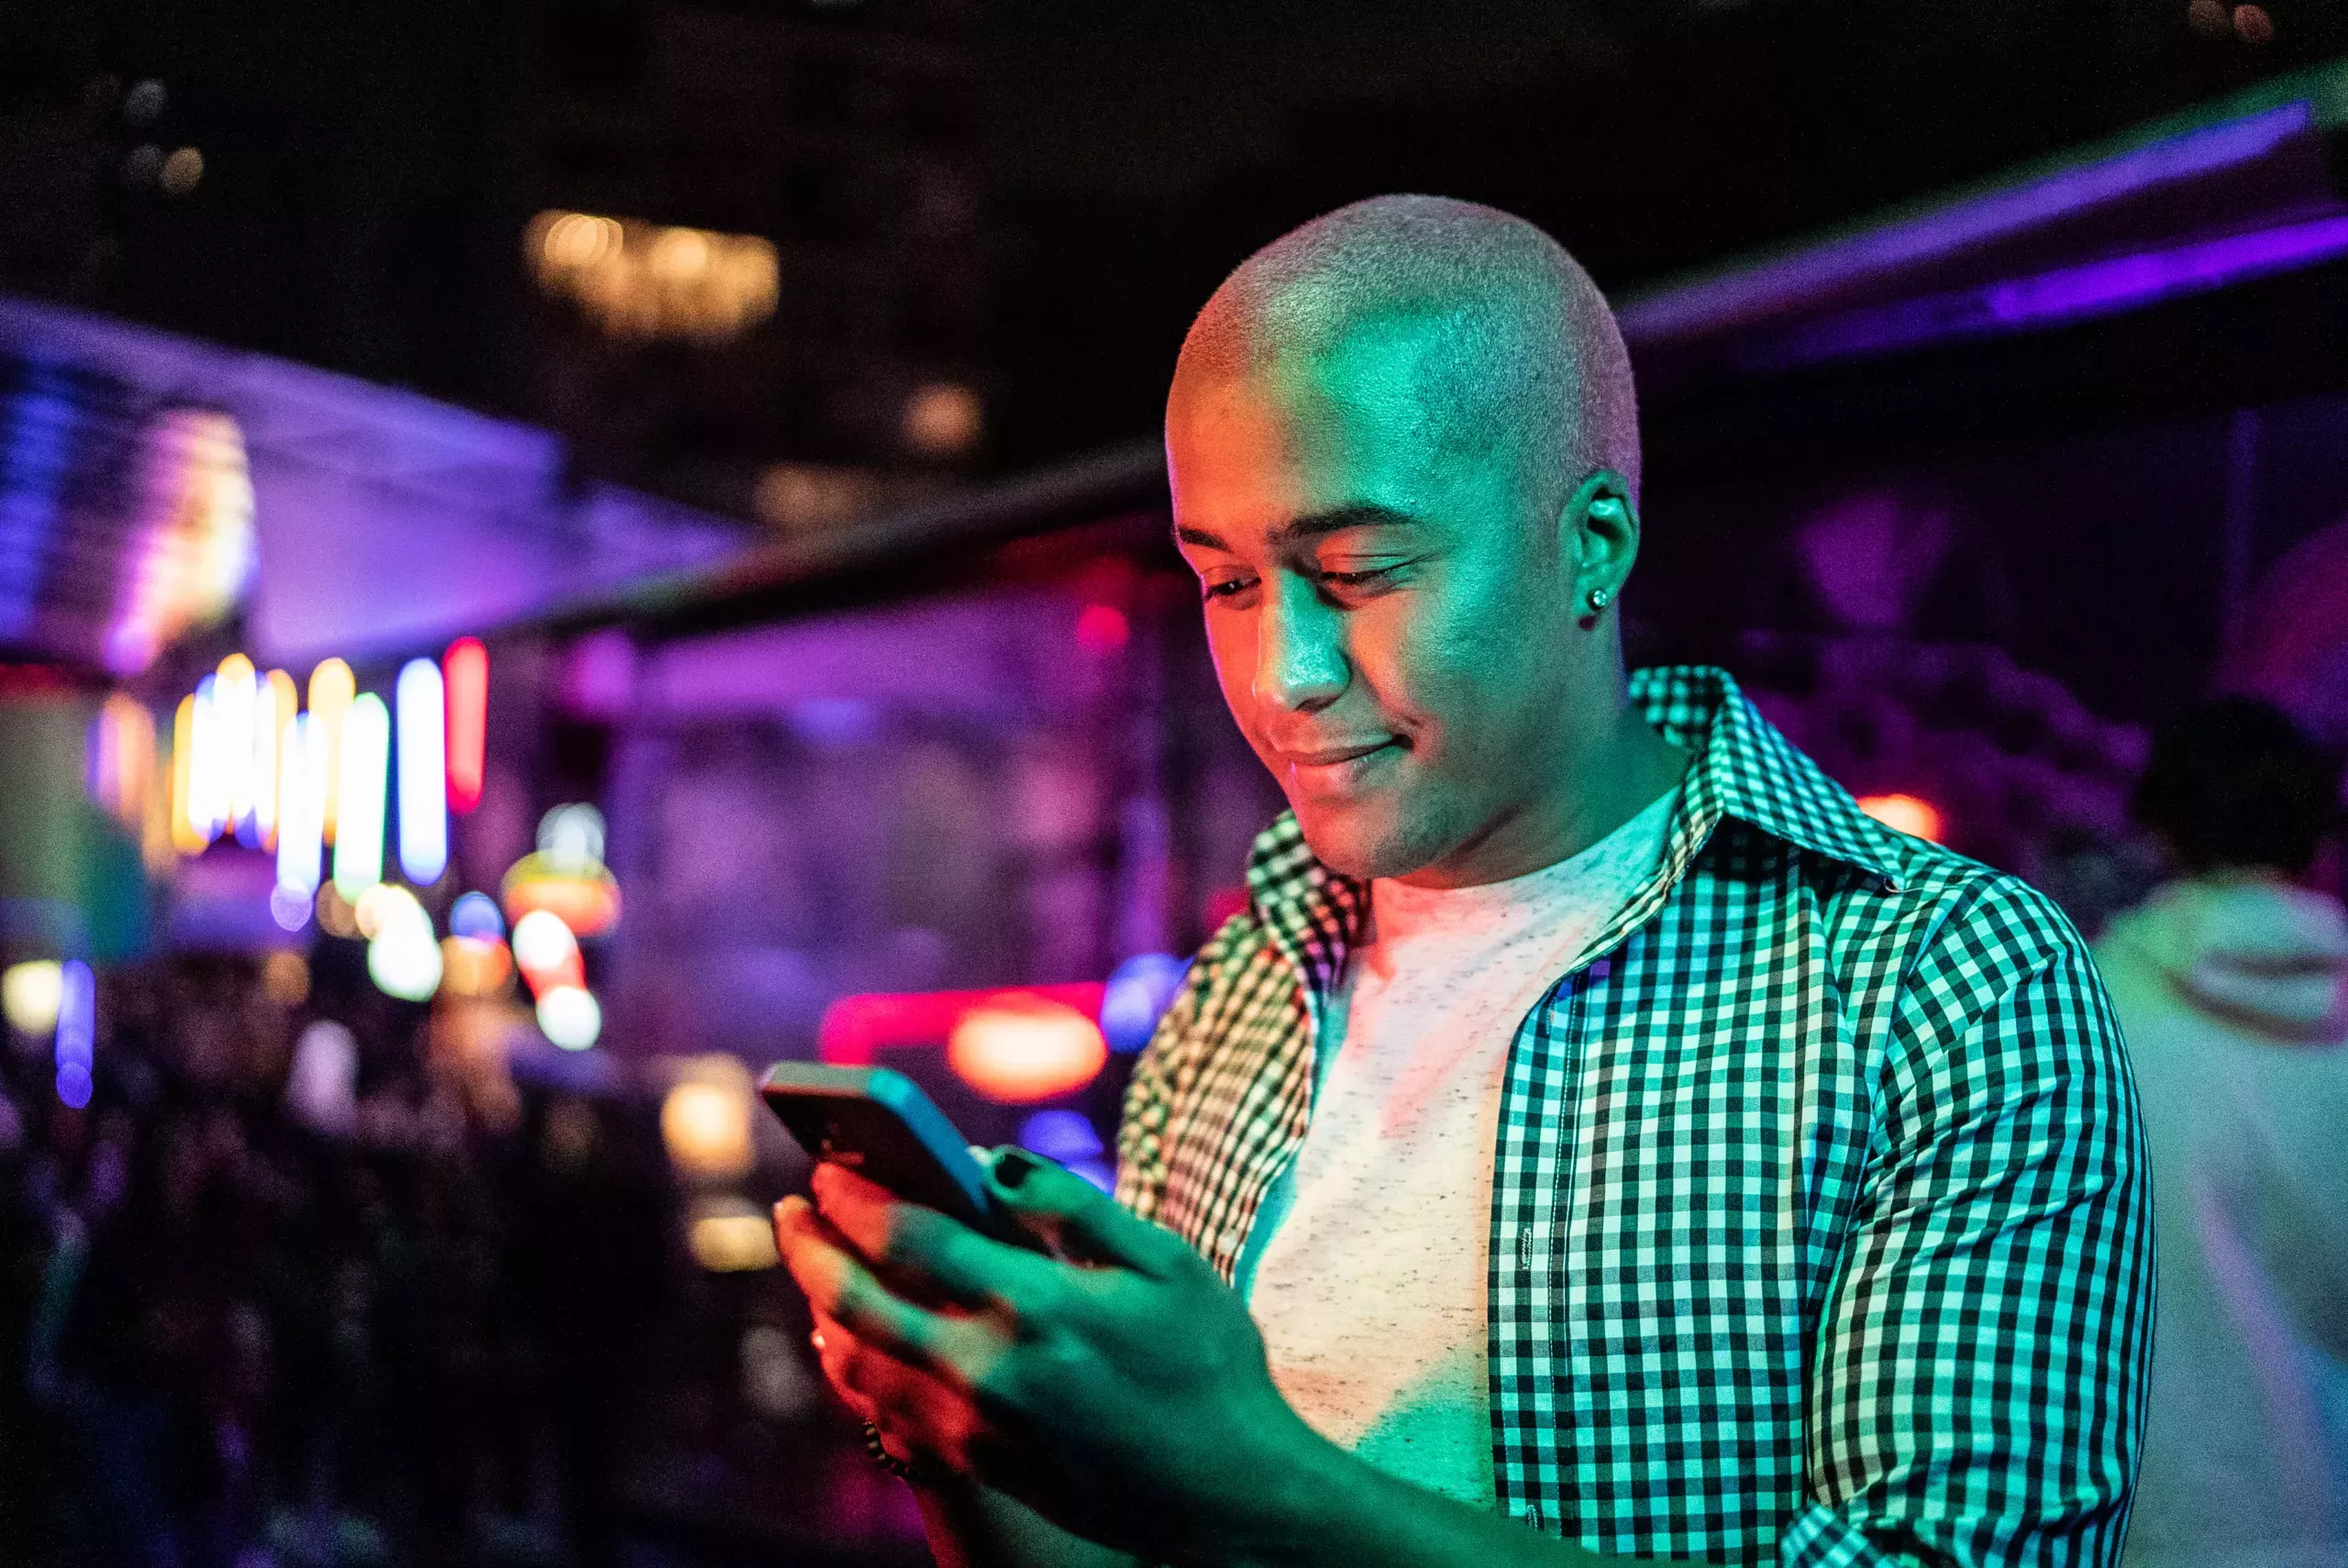 A young man with a buzzcut wears a white crewneck t-shirt under a plaid button down shirt unbuttoned. He stands looking at his iPhone, which he holds in his left hand. He has pierced ears and painted black nails. He stands in the midst of a purple-colored gay bar, blurred in the background.